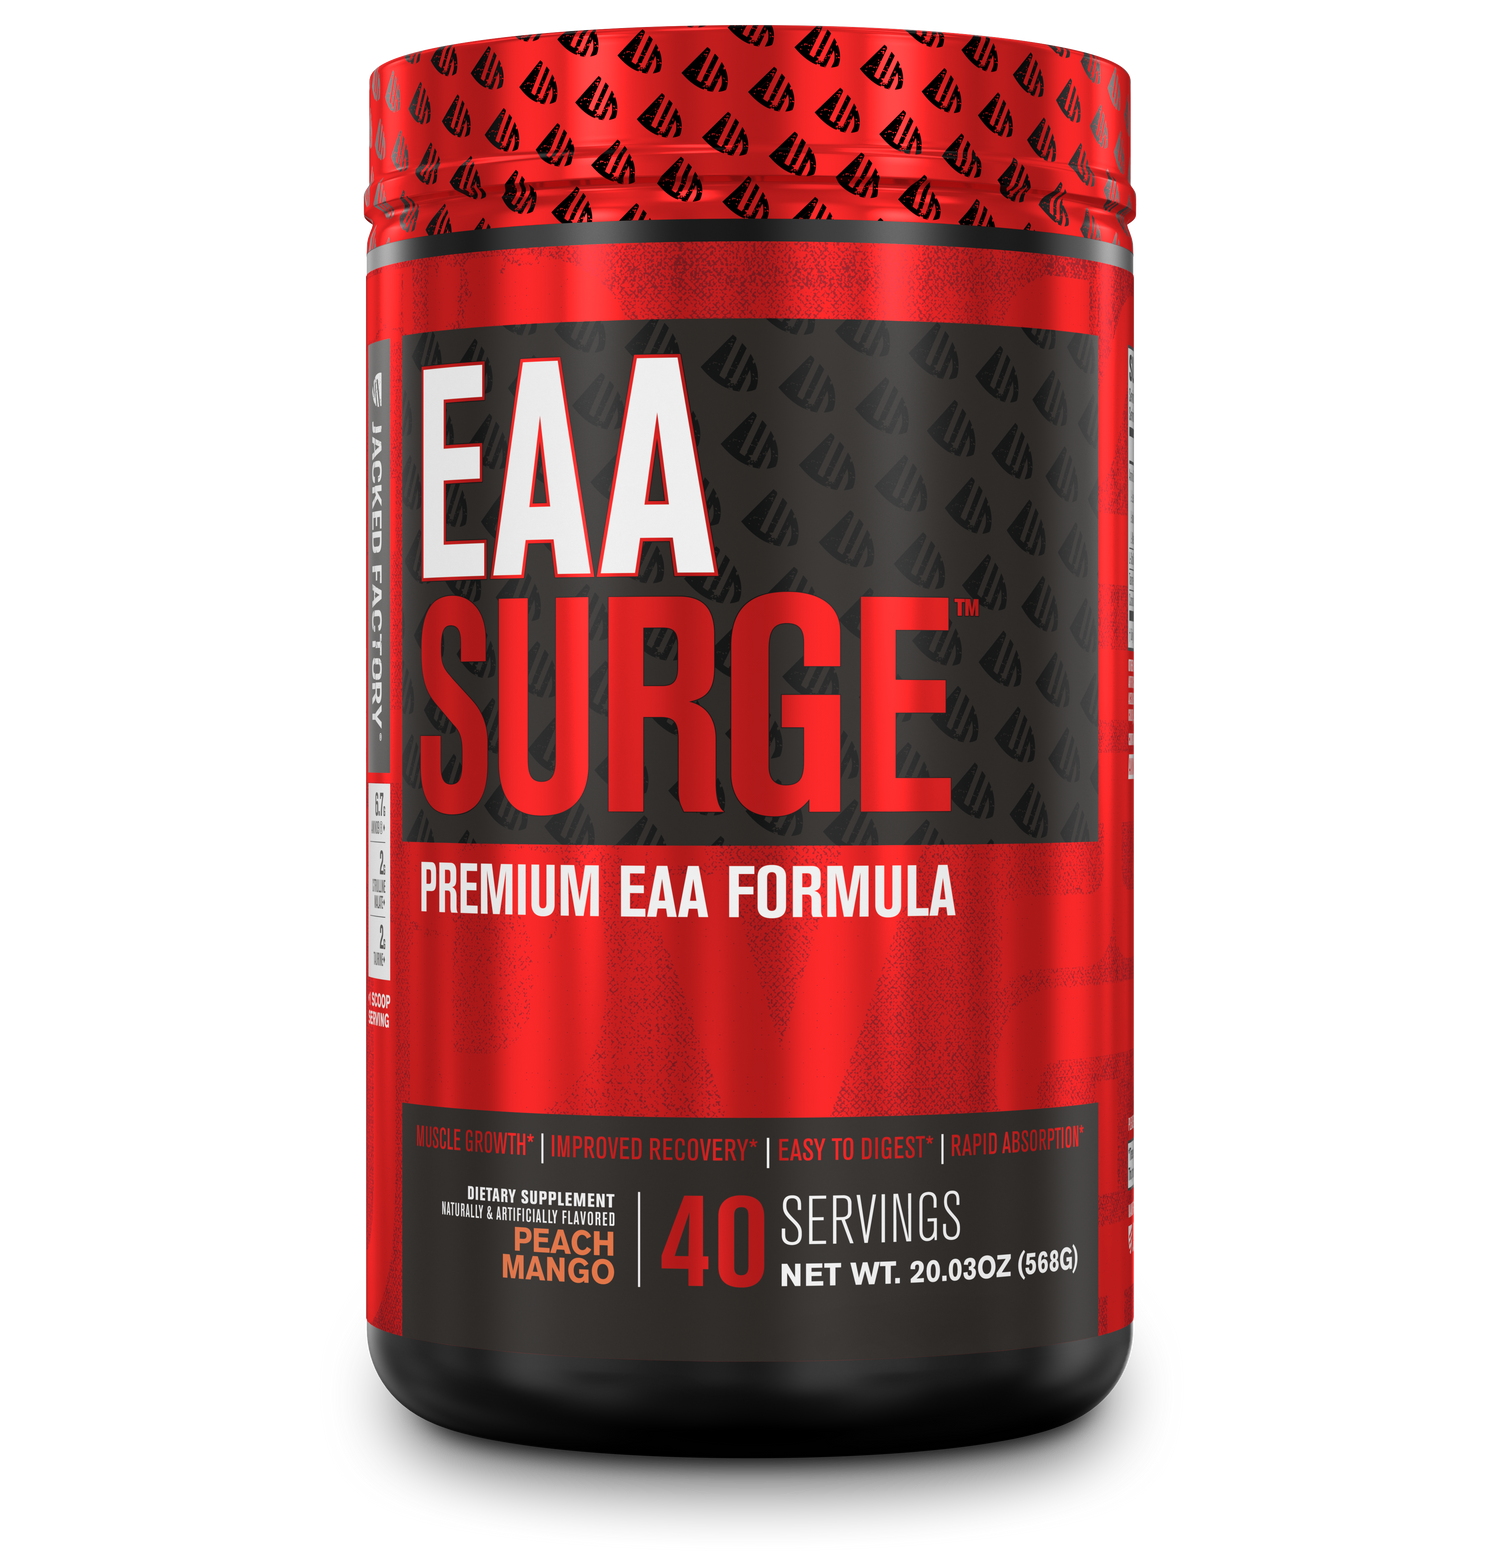 Jacked Factory's Peach Mango EAA Surge (40 servings) in a black bottle with red label